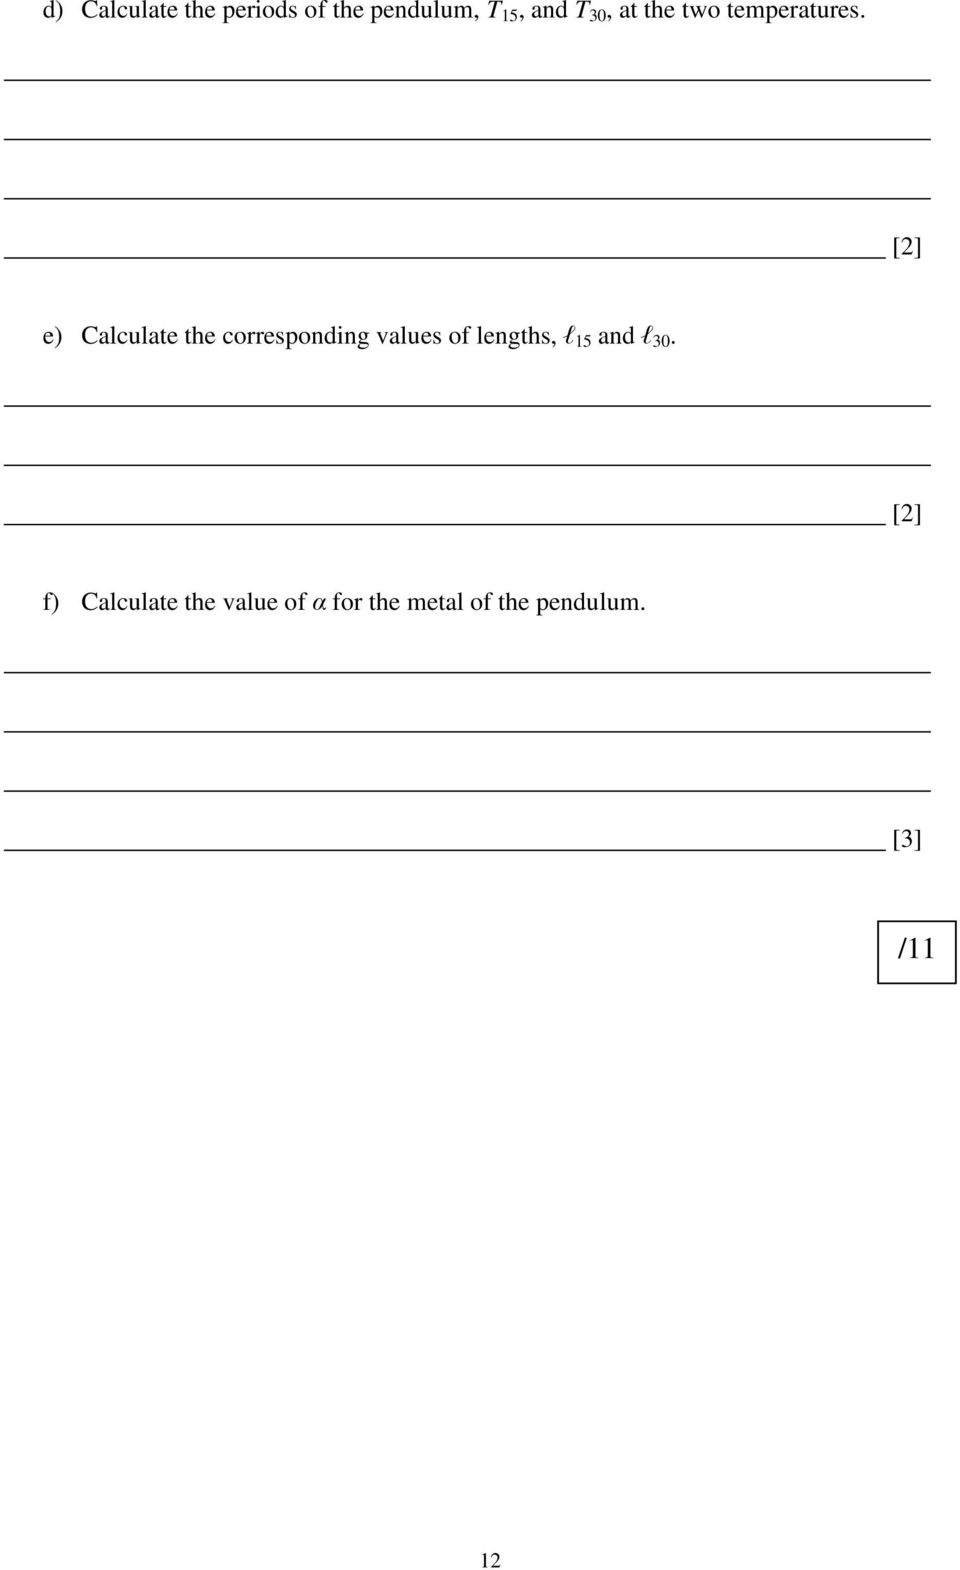 e) Calculate the corresponding values of lengths, l